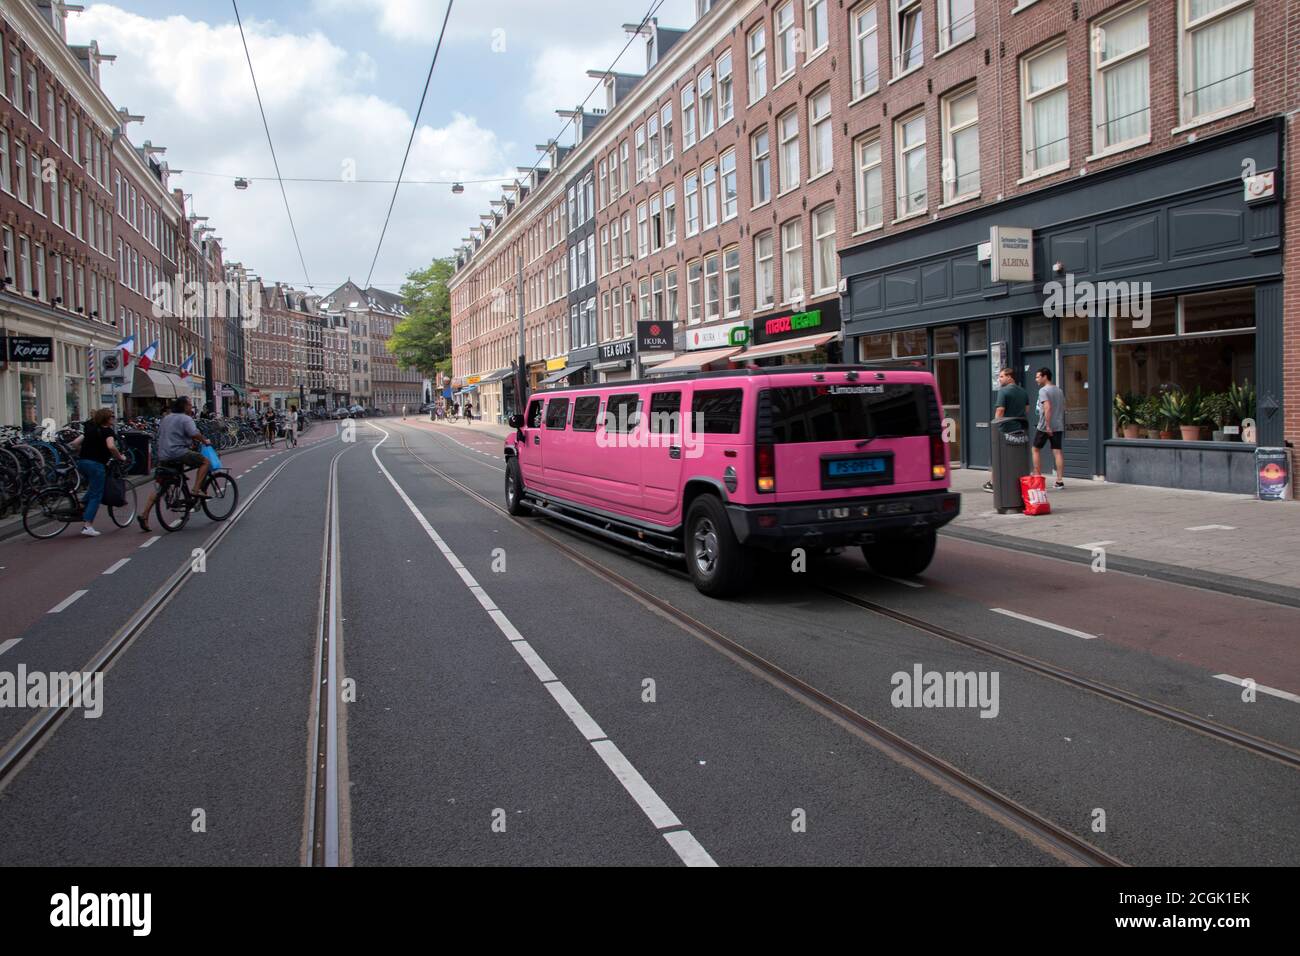 Pink Giant Limousine At Amsterdam The Netherlands 15-8-2020 Stock Photo